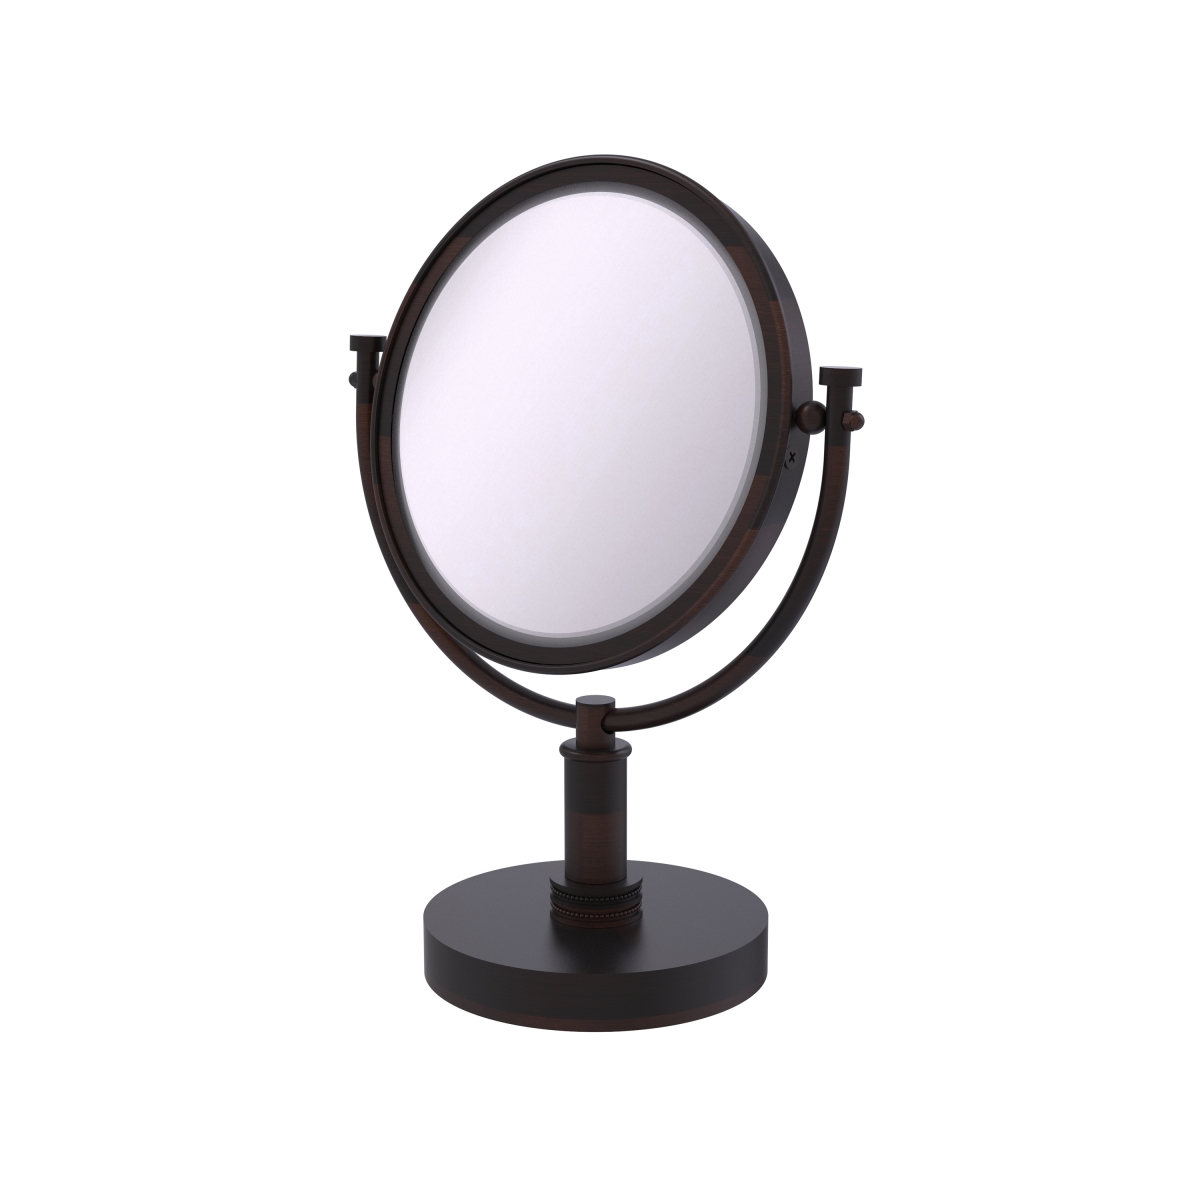 Picture of Allied Brass DM-4D-2X-VB 8 in. Vanity Top Make-Up Mirror 2X Magnification, Venetian Bronze - 15 x 8 x 8 in.